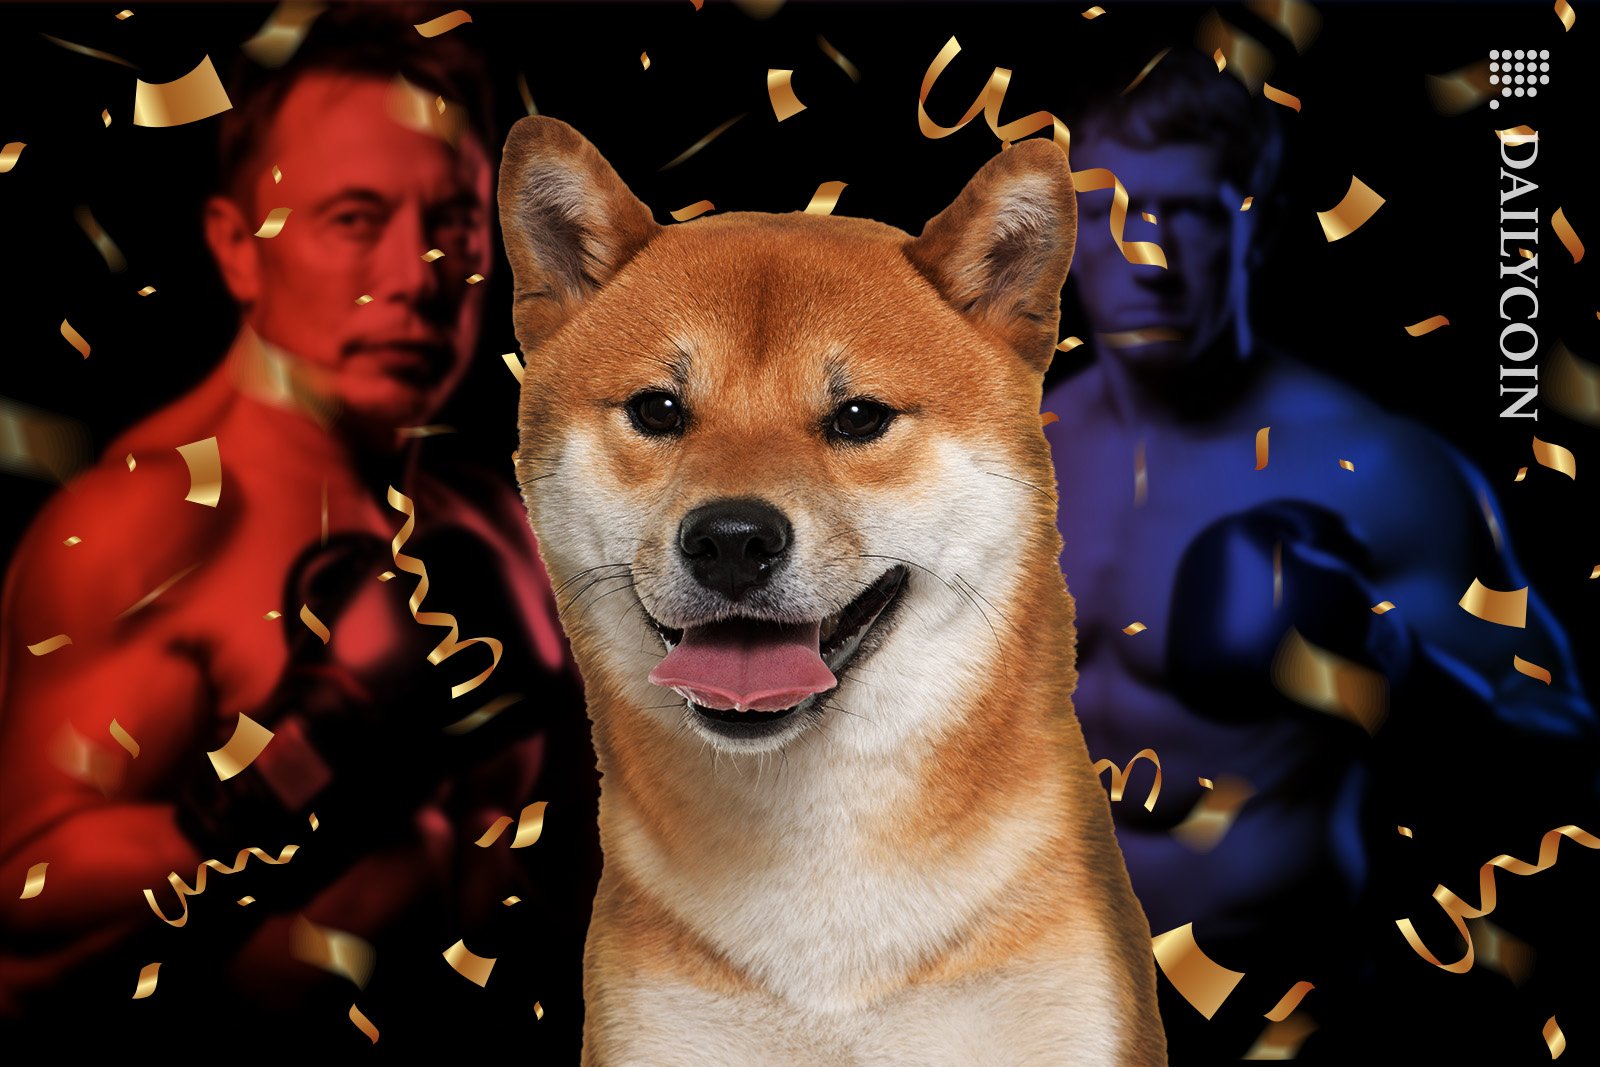 Shiba Inu smiling at the front, whist Mark Zuckenberg and Elon Musk are ready to fight in the background.